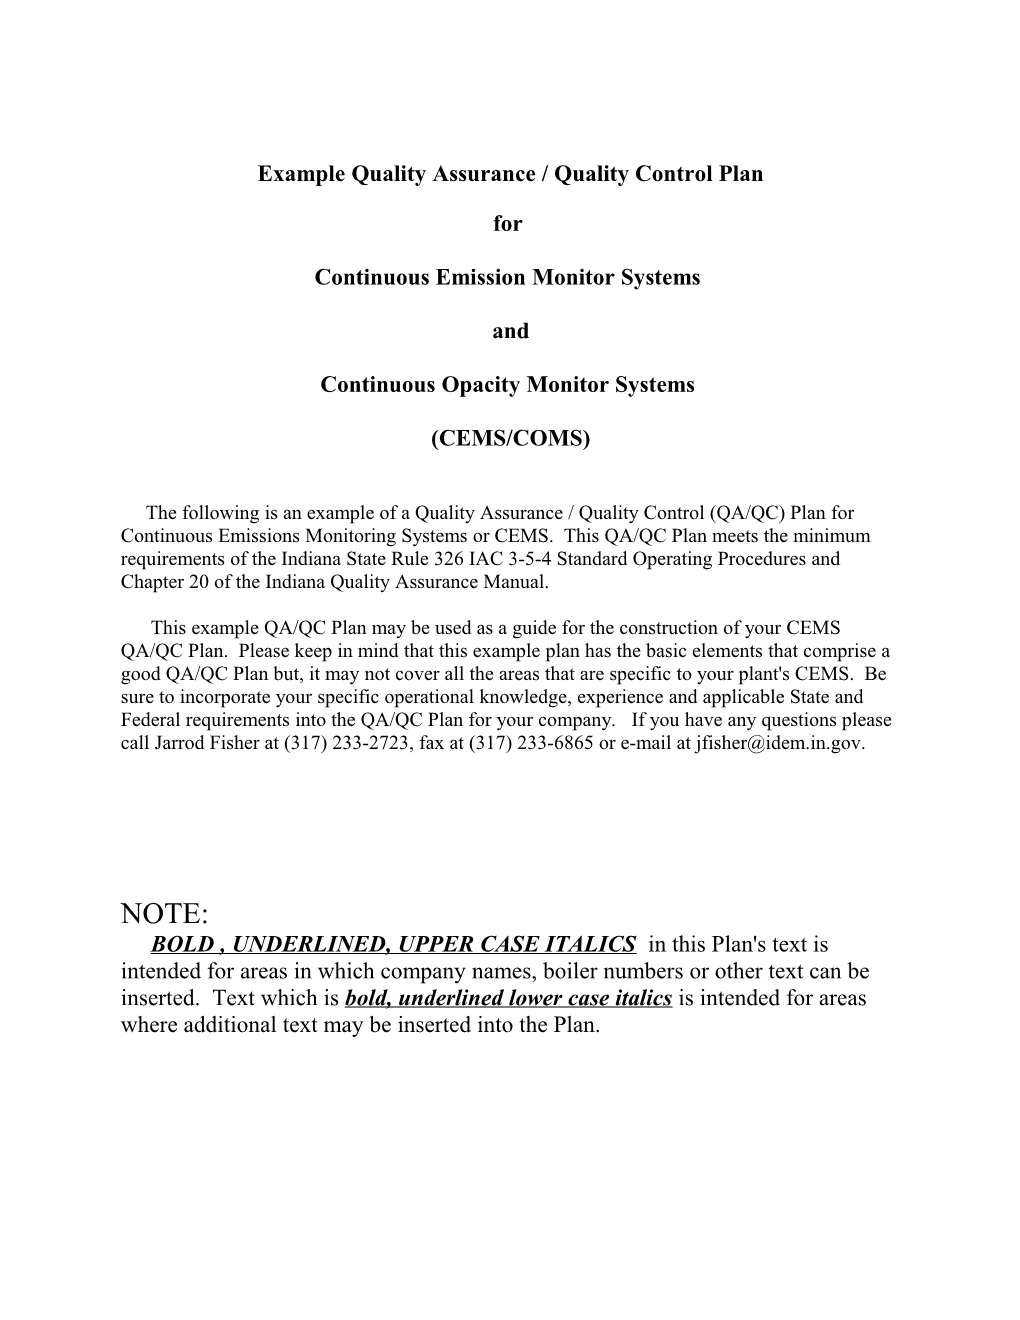 Example Quality Assurance / Quality Control Plan